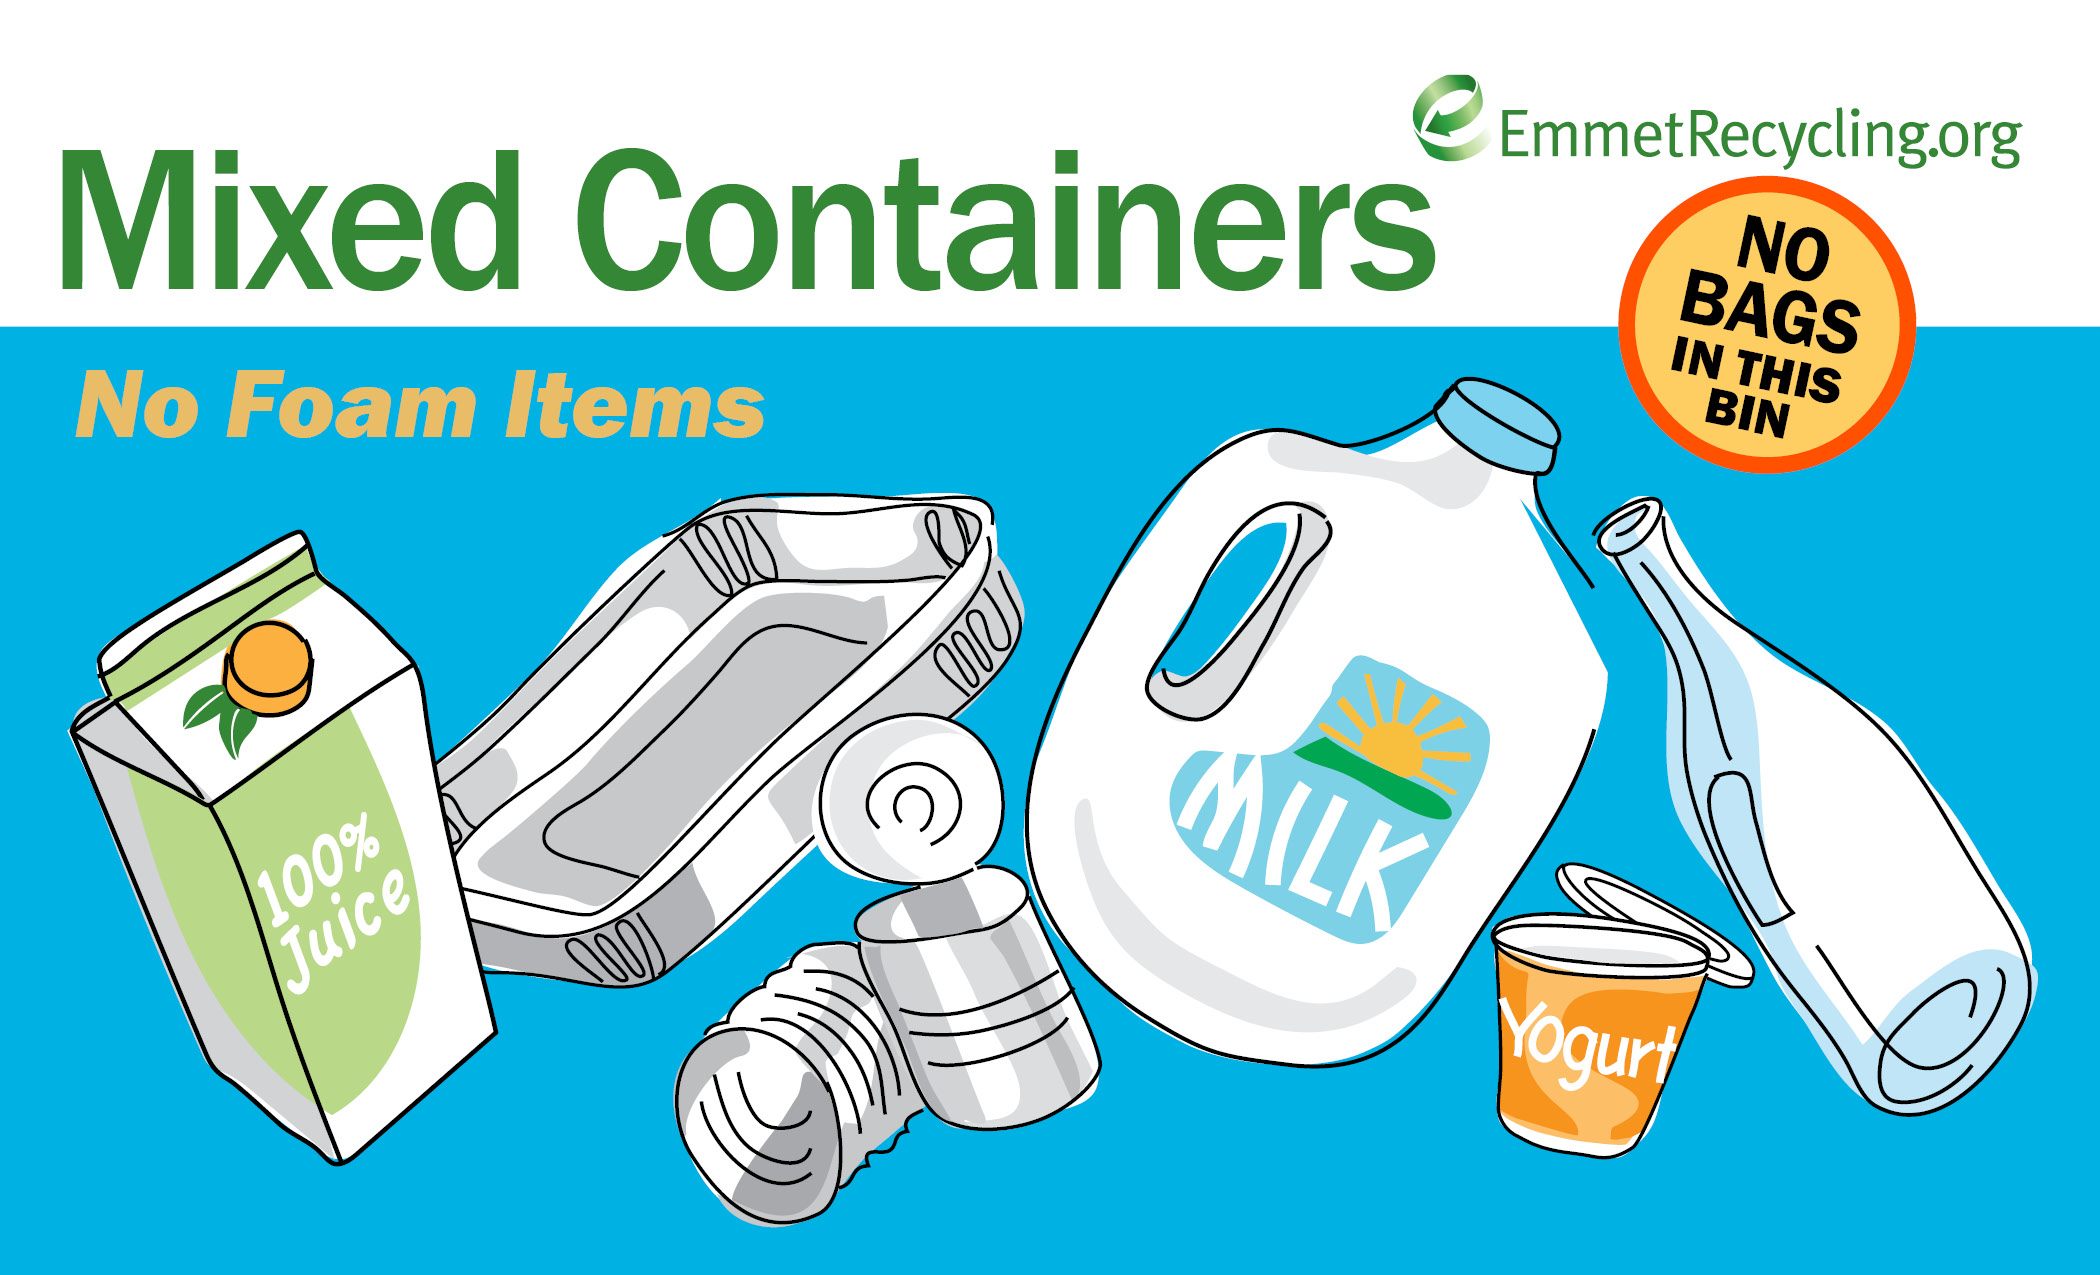 Flap%20Label%20EMMET%20Mixed%20Containers%20More%20Color